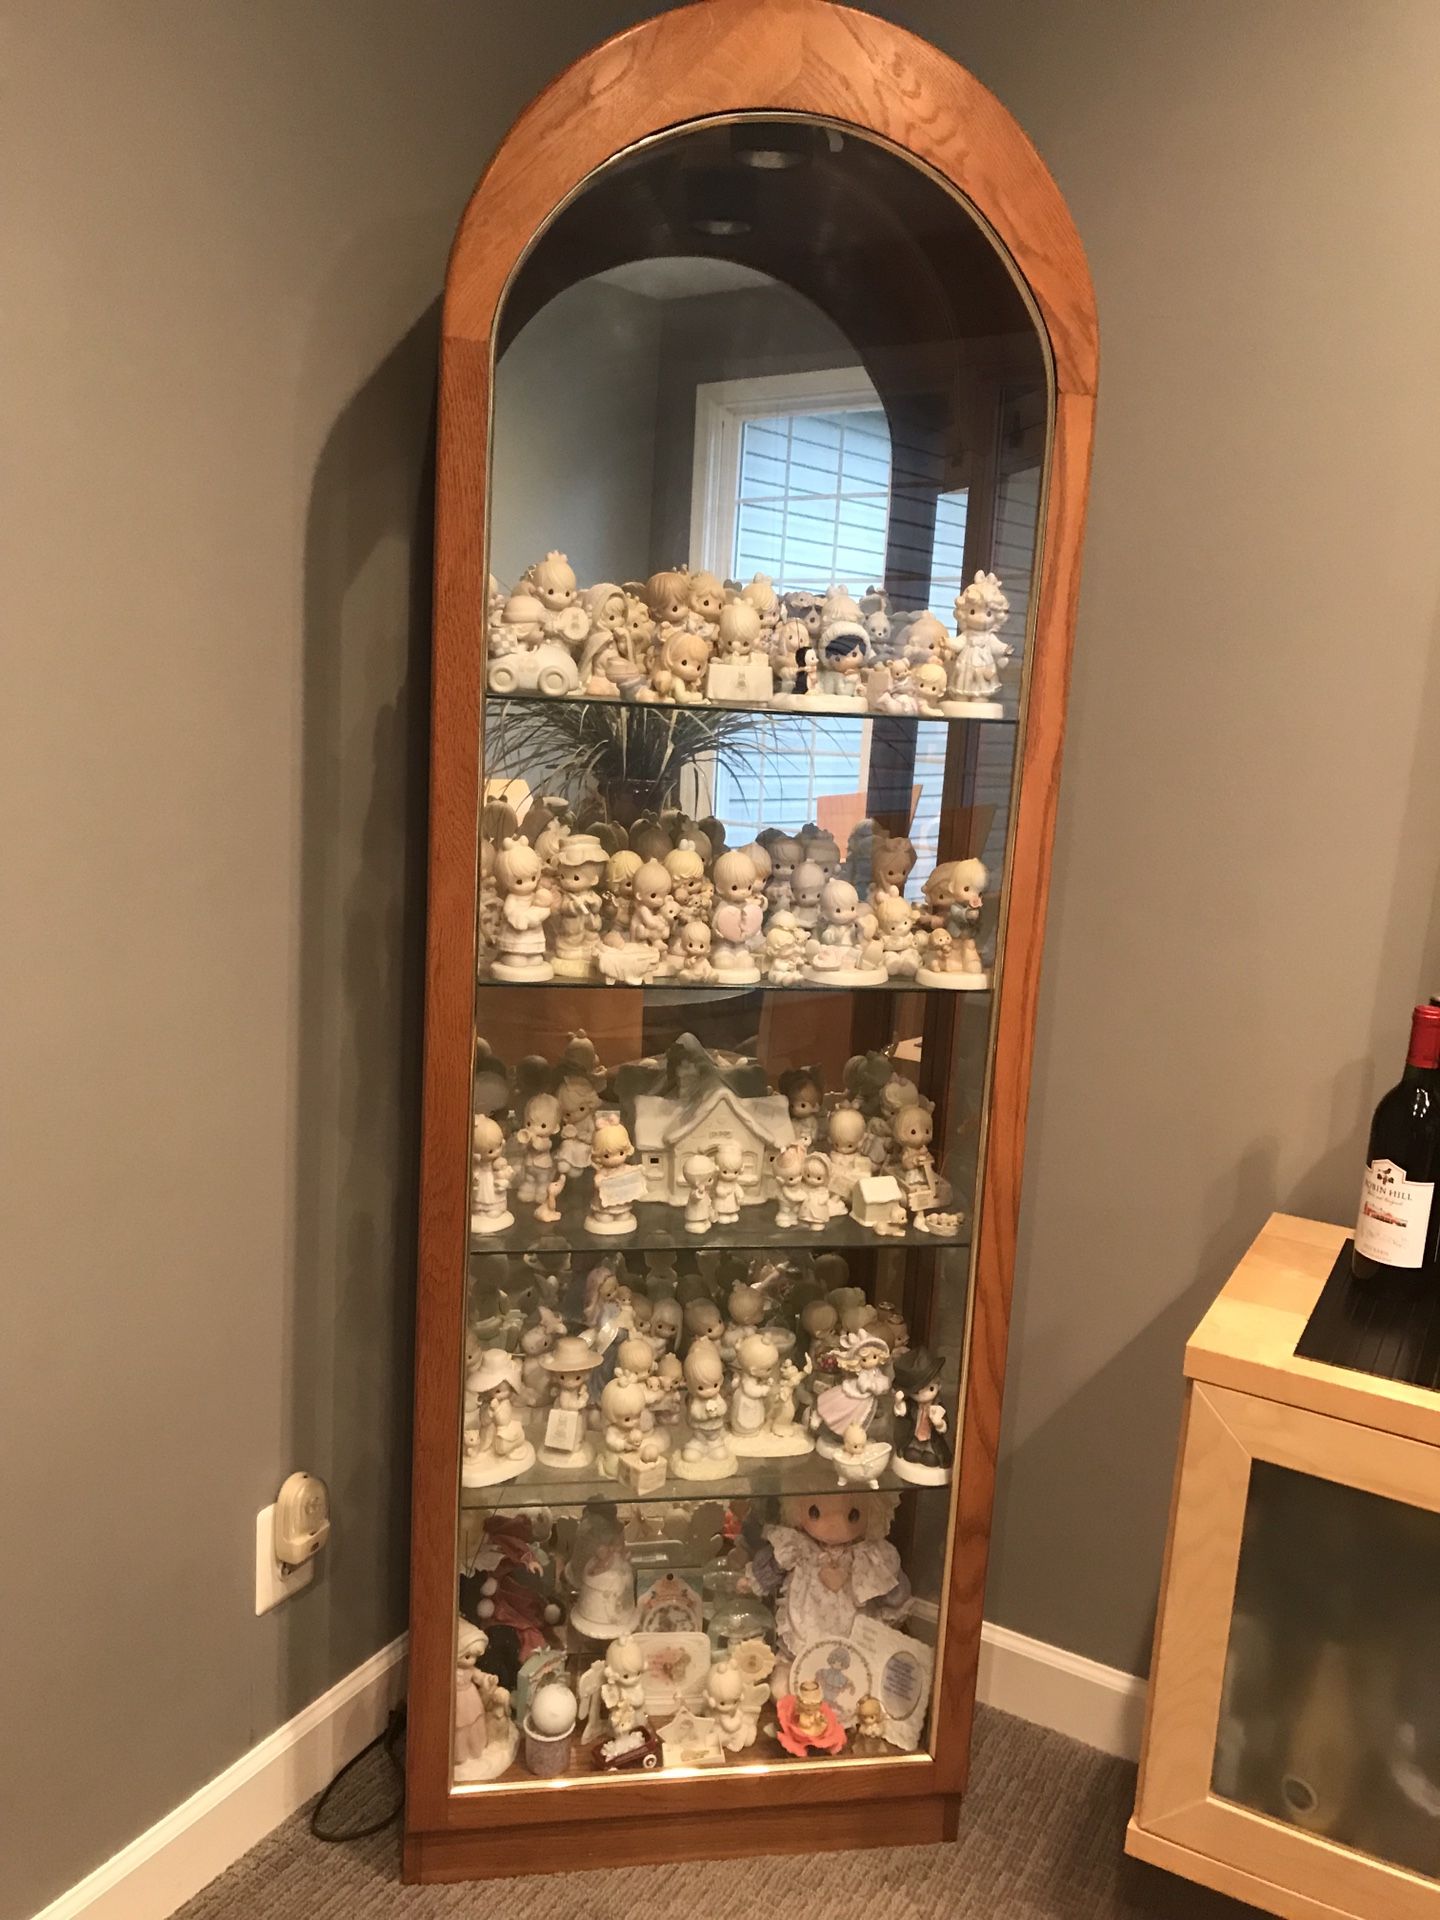 Precious Moments figurines and cabinet